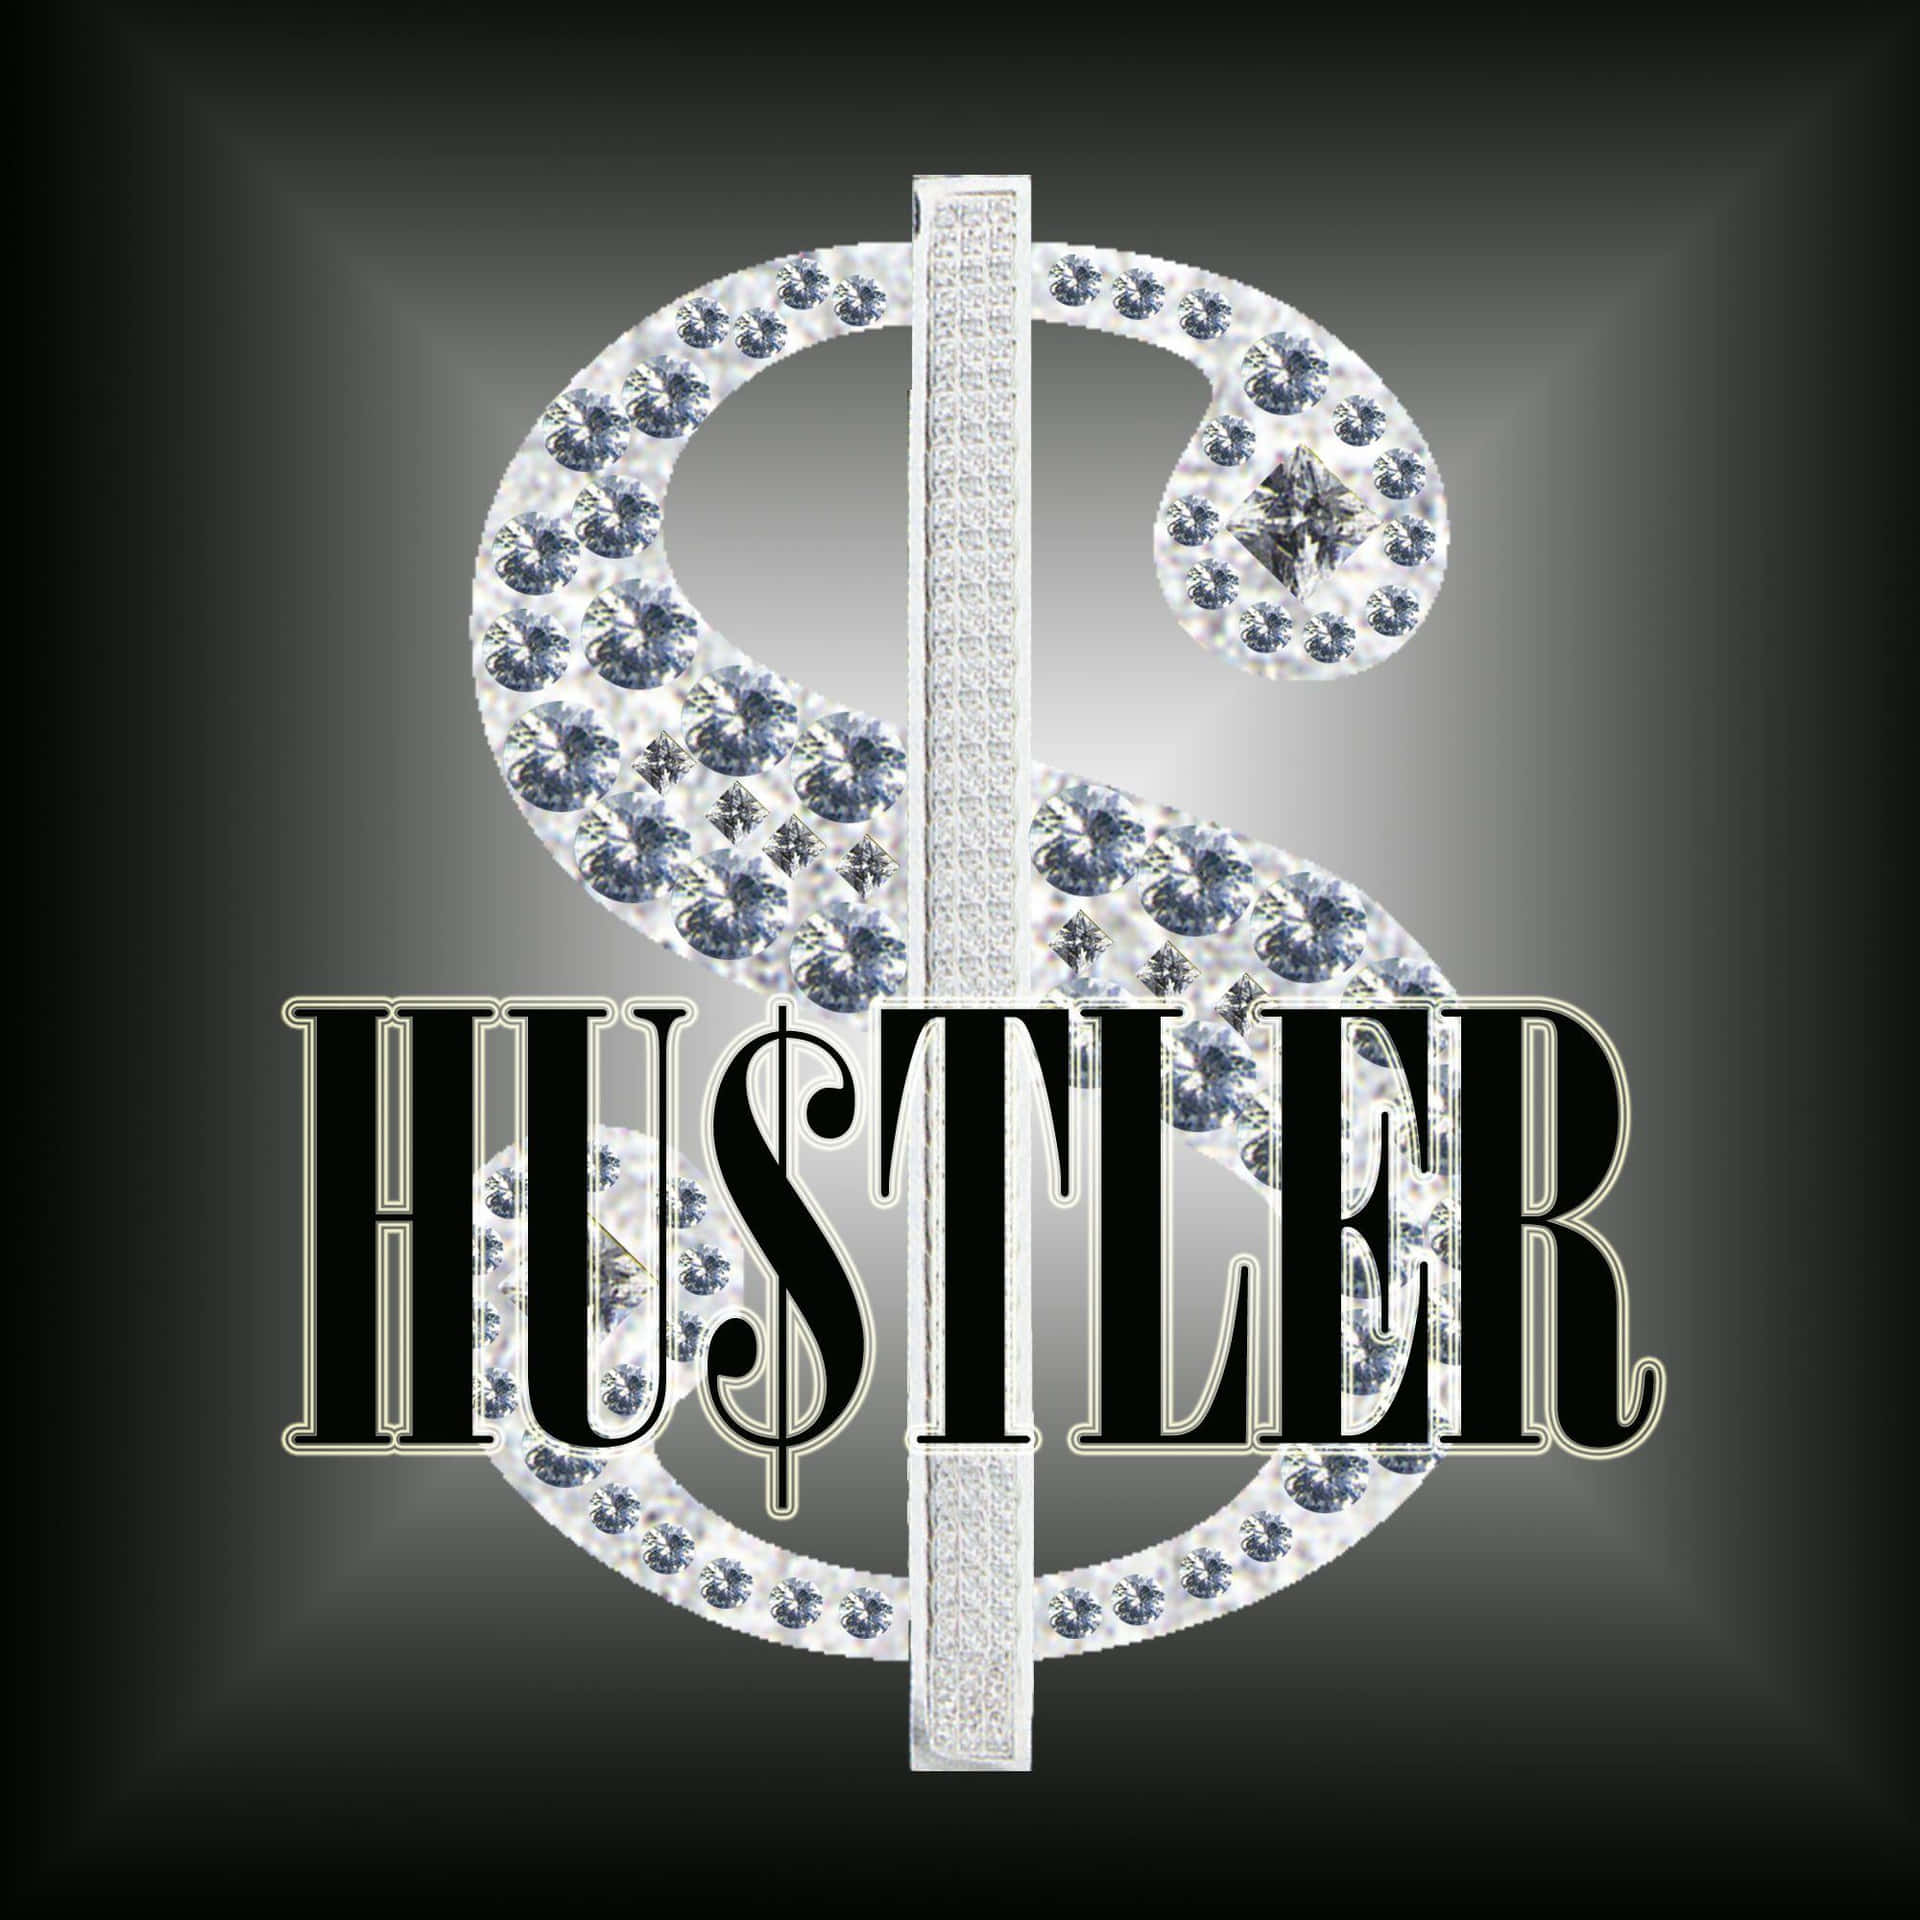 Experience luxury with Hustler Wallpaper